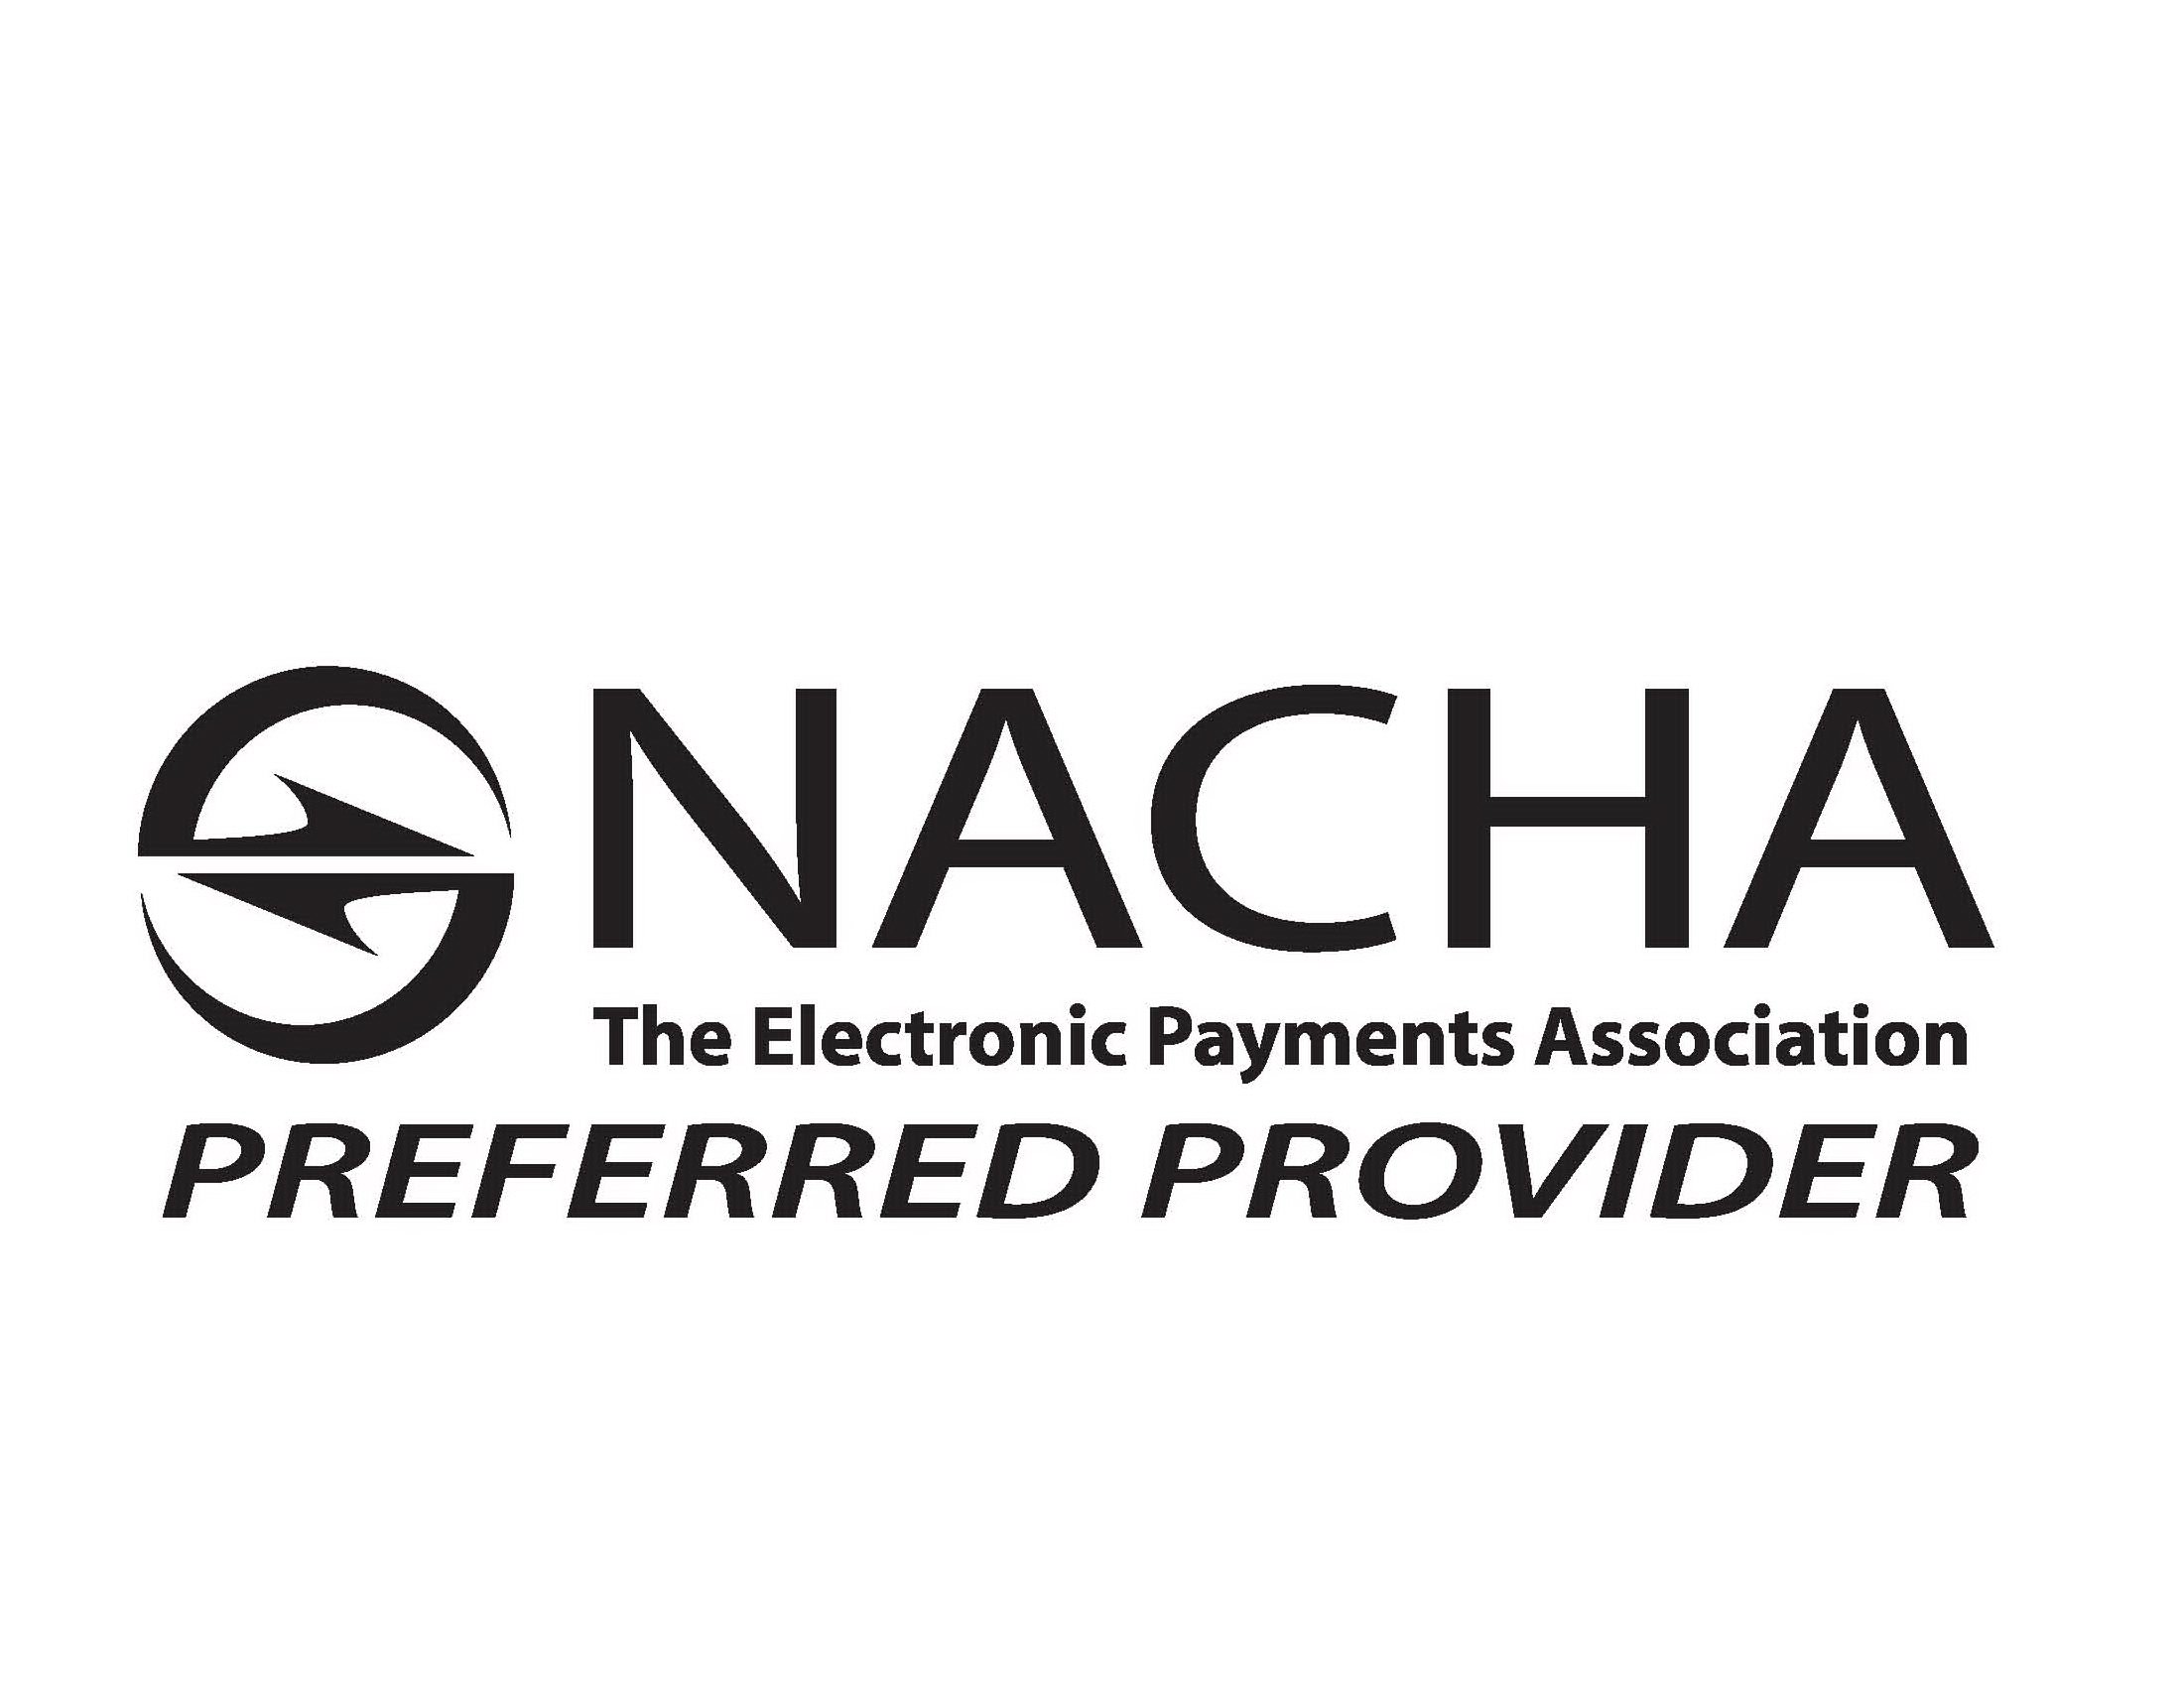  NACHA THE ELECTRONIC PAYMENTS ASSOCIATION PREFERRED PROVIDER